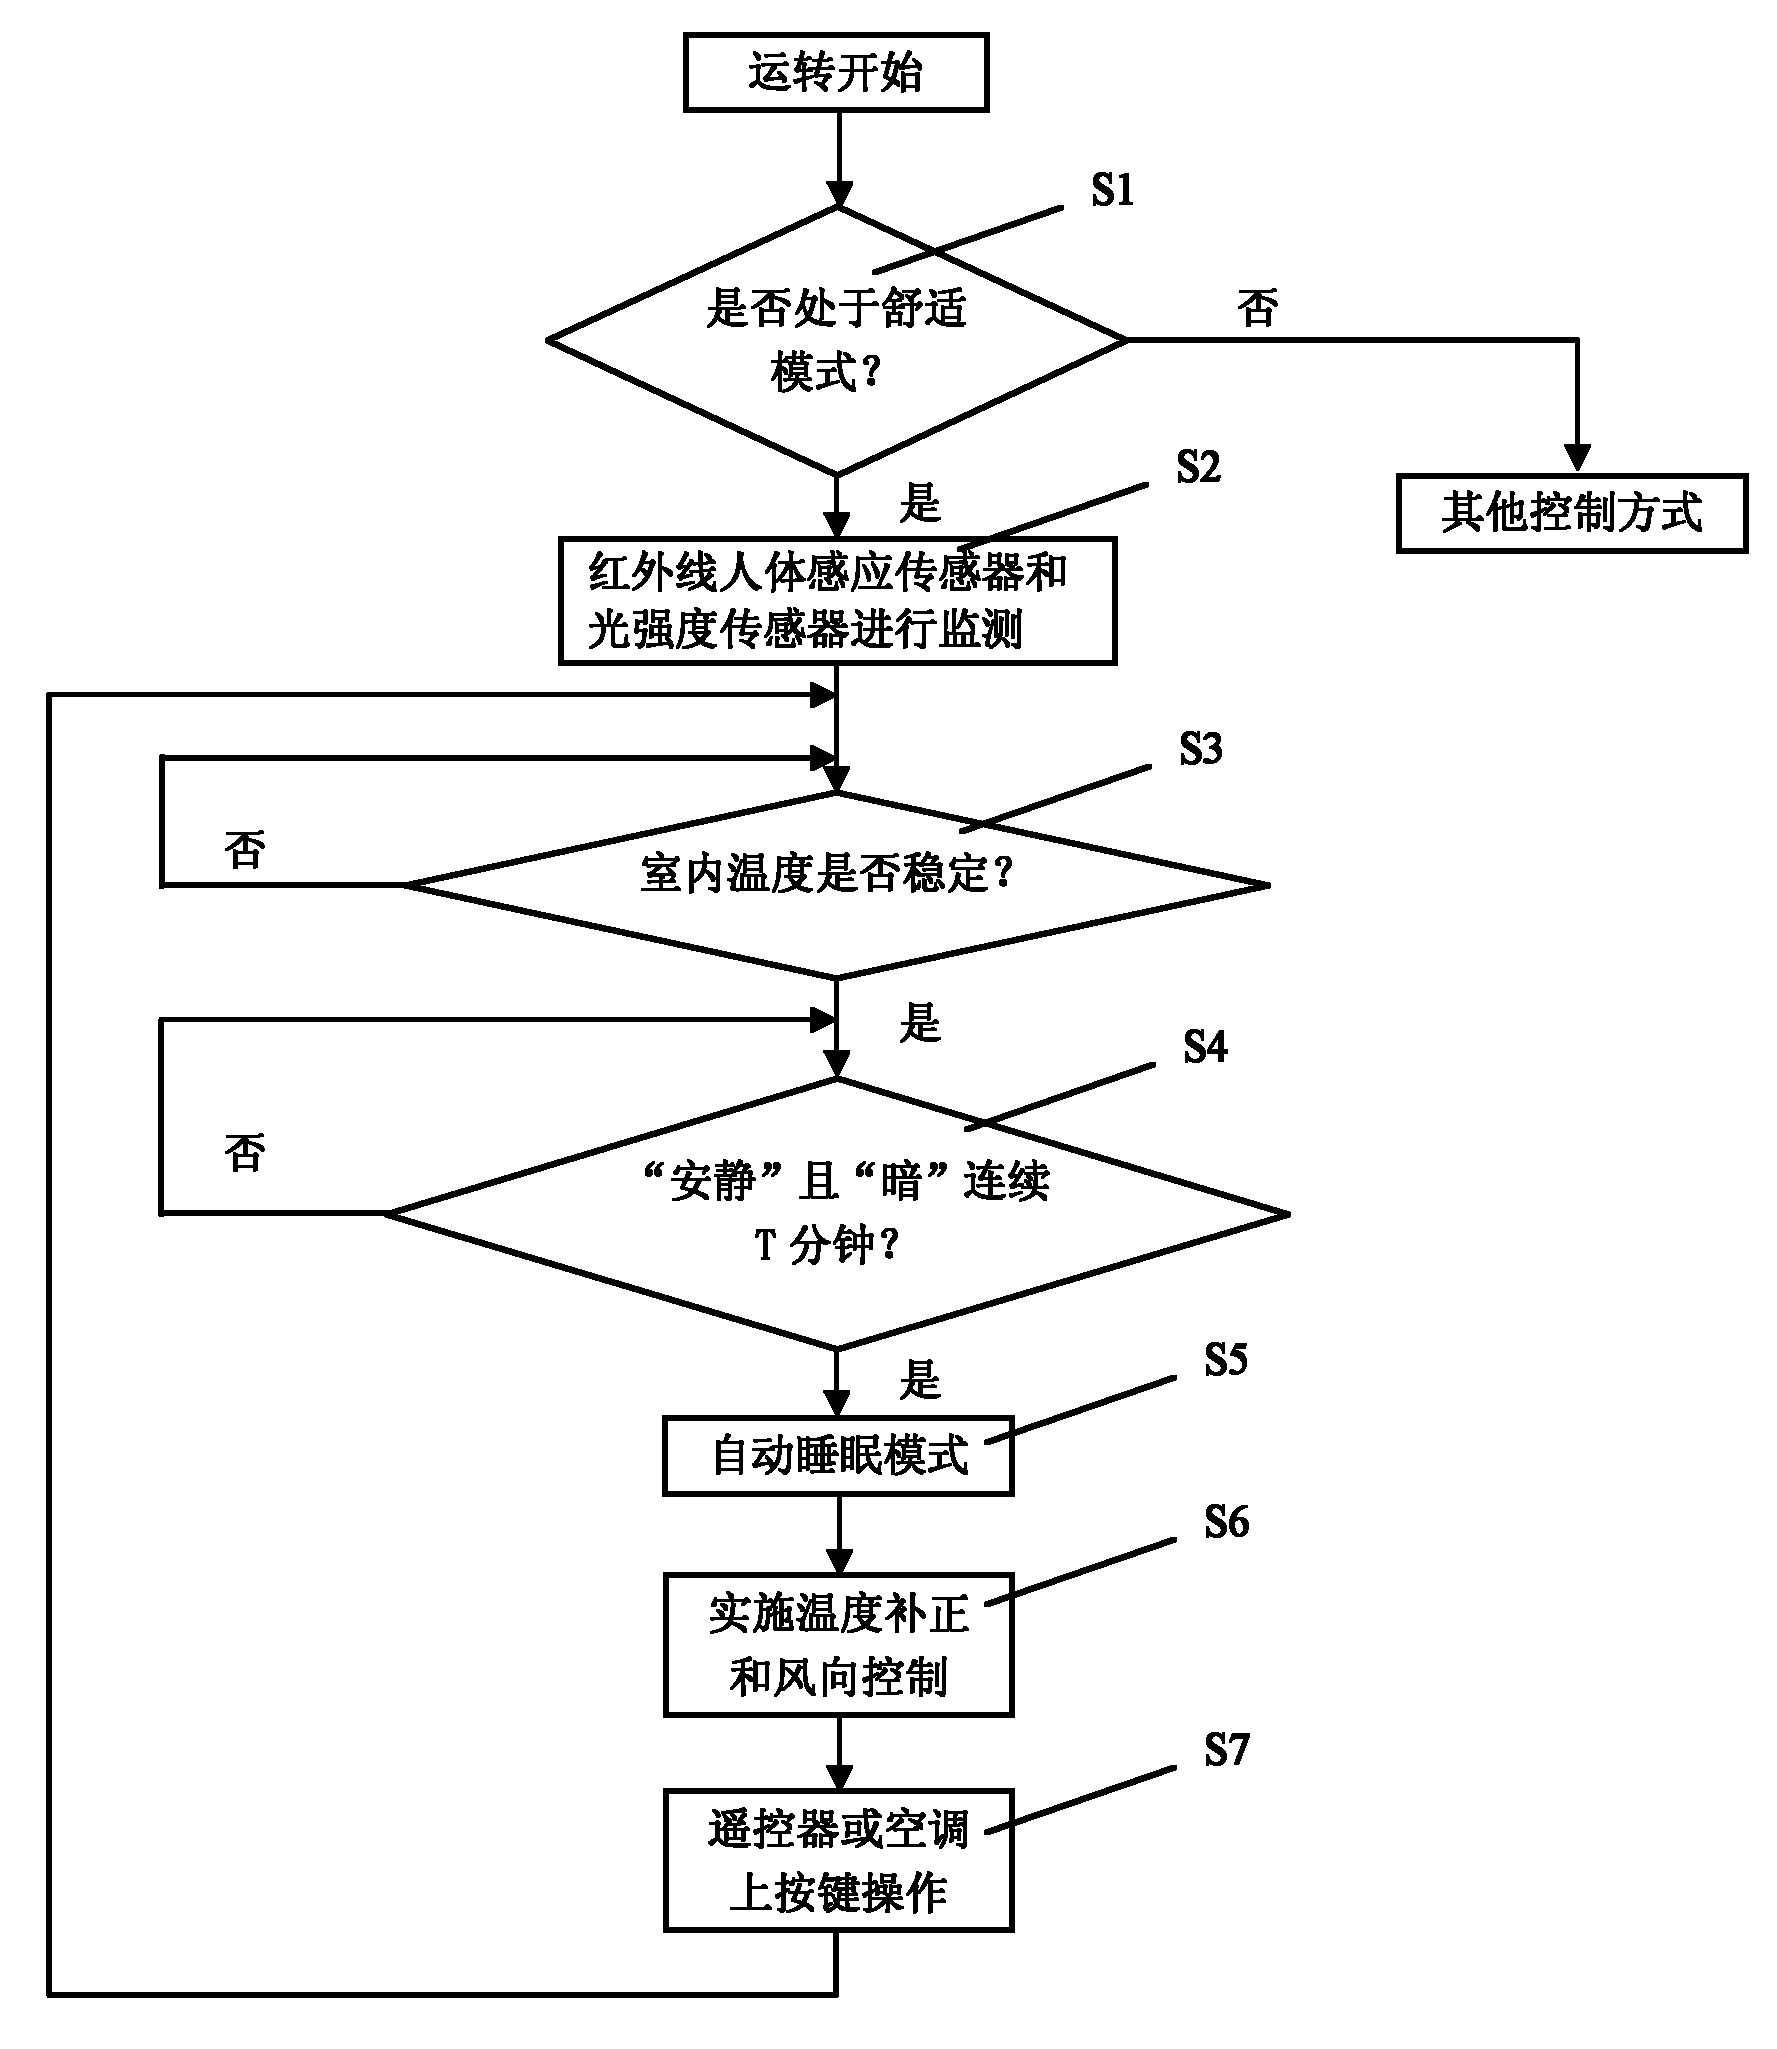 Control method for automatic sleep mode of air conditioner